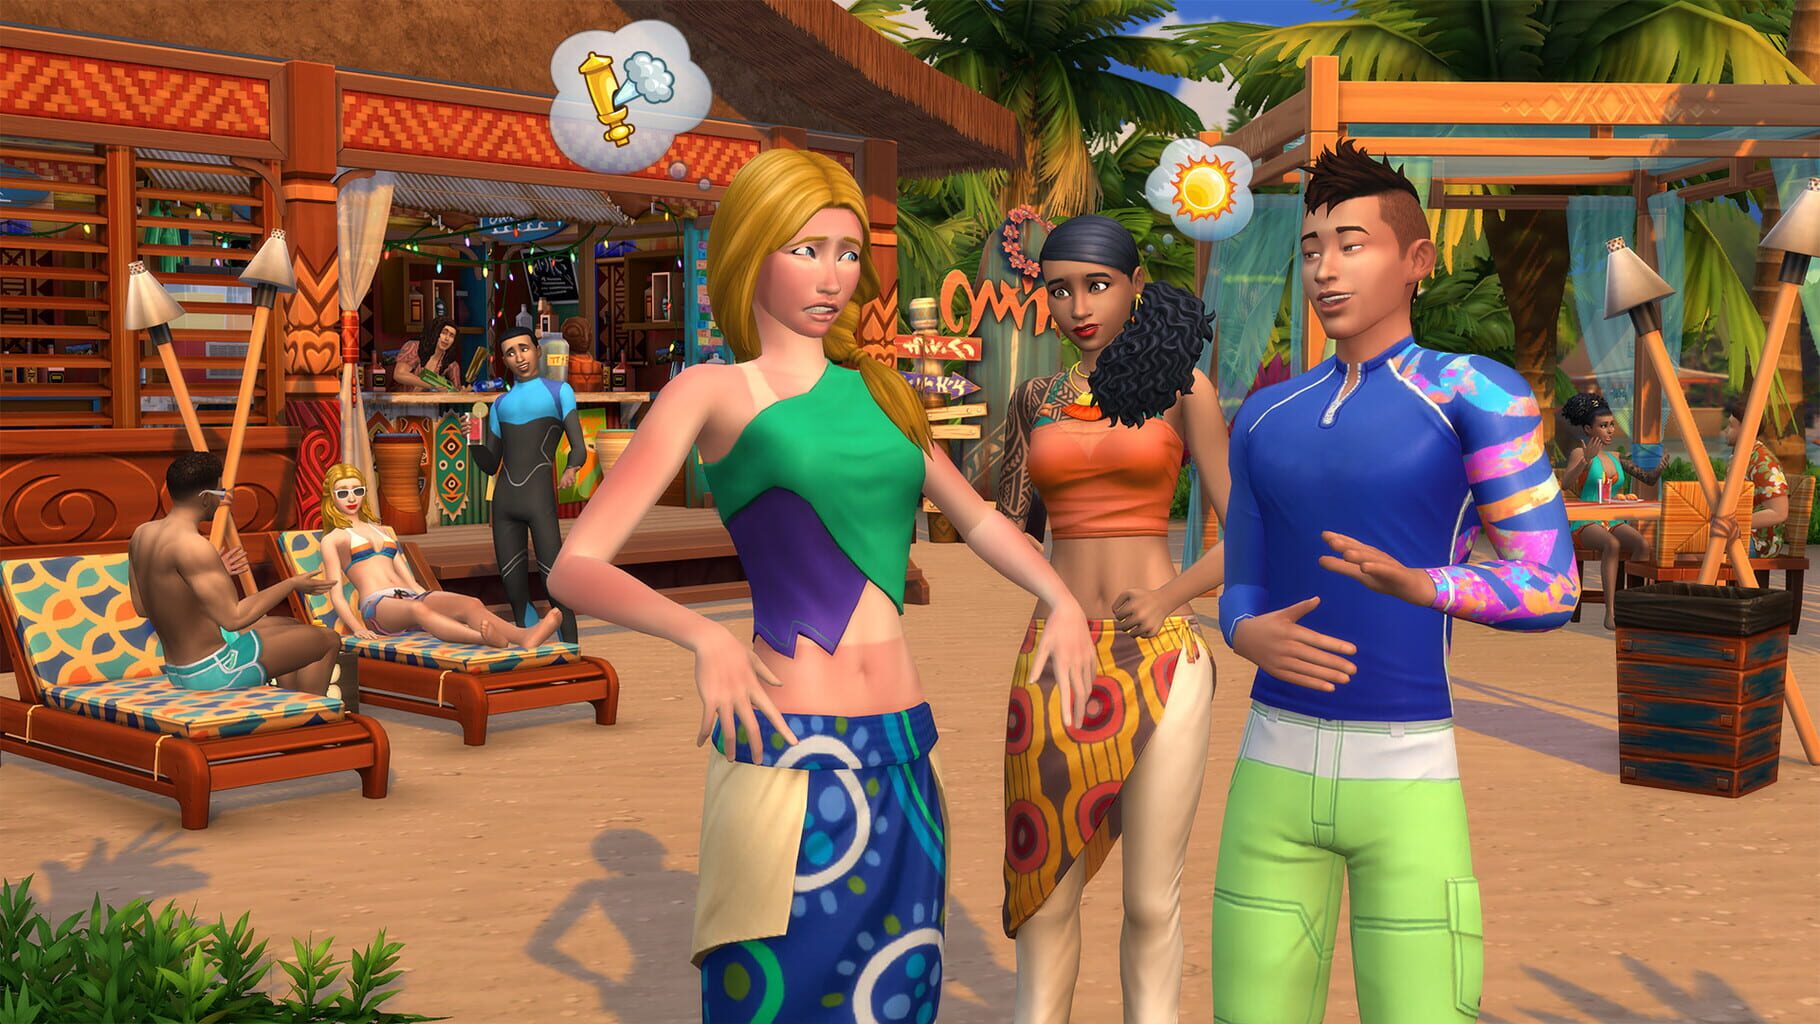 The Sims 4: Island Living Image